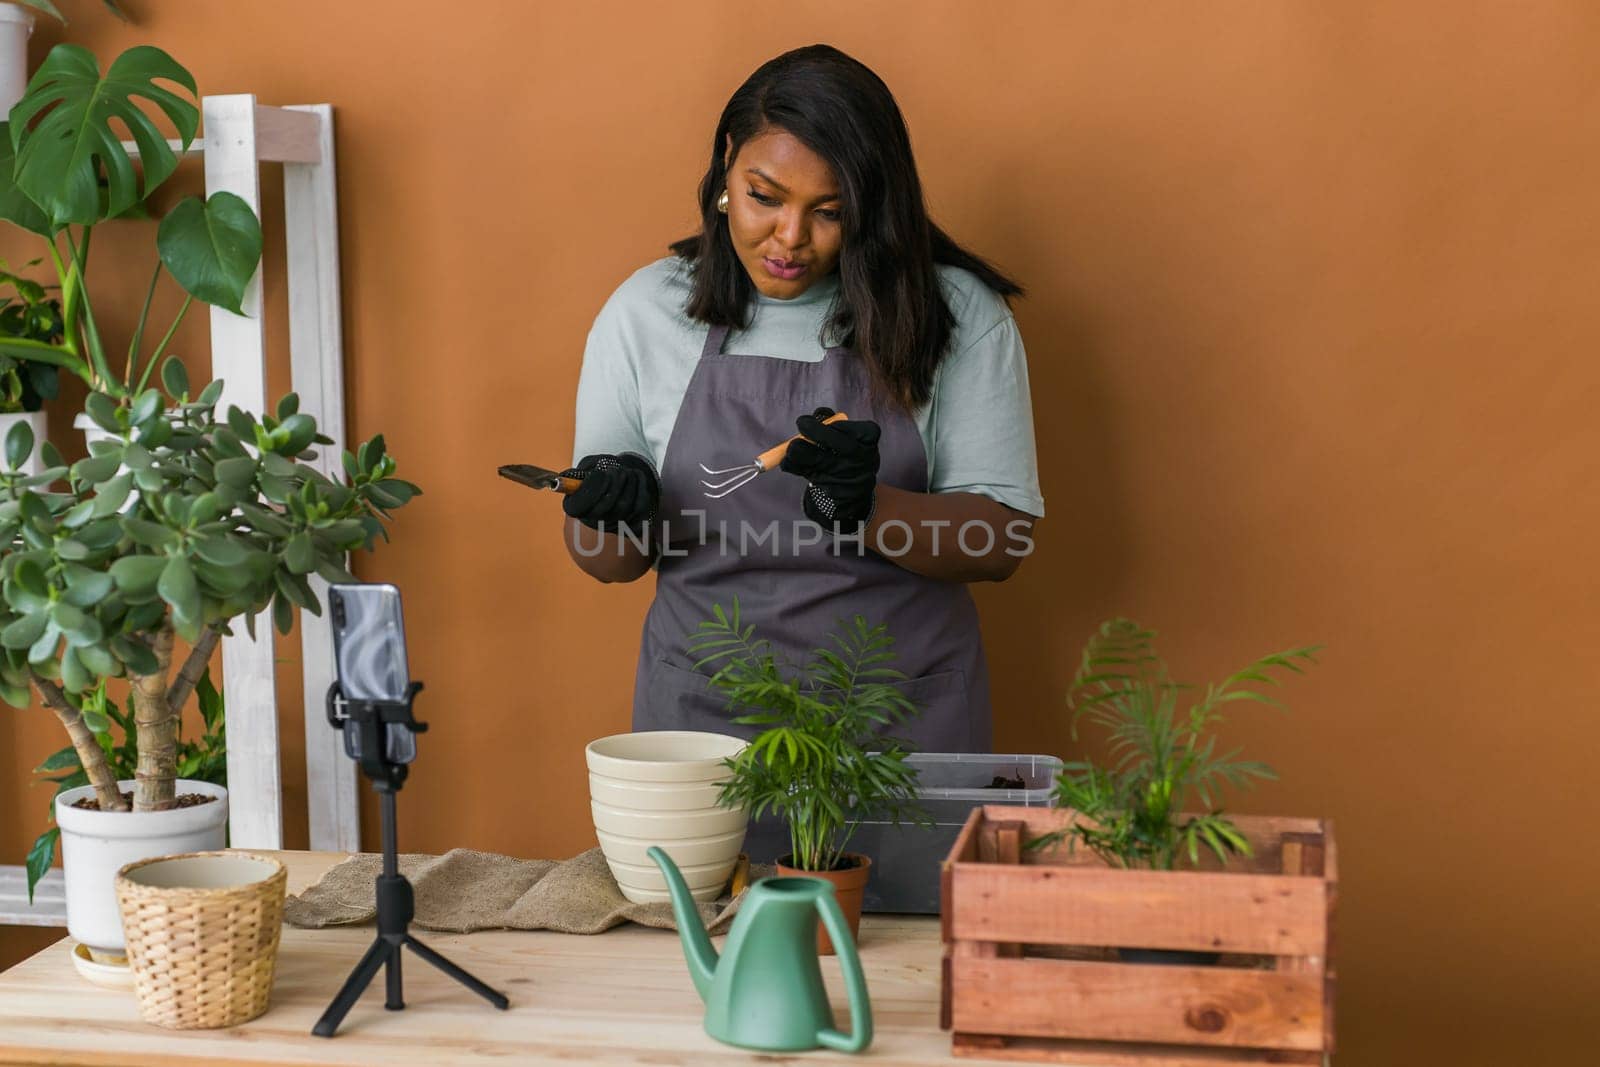 African american girl vlogger influencer or SME owner work on home video camera selfie shoot filming take care home plants and transplanting plant in flowerpot. Home gardening and florist